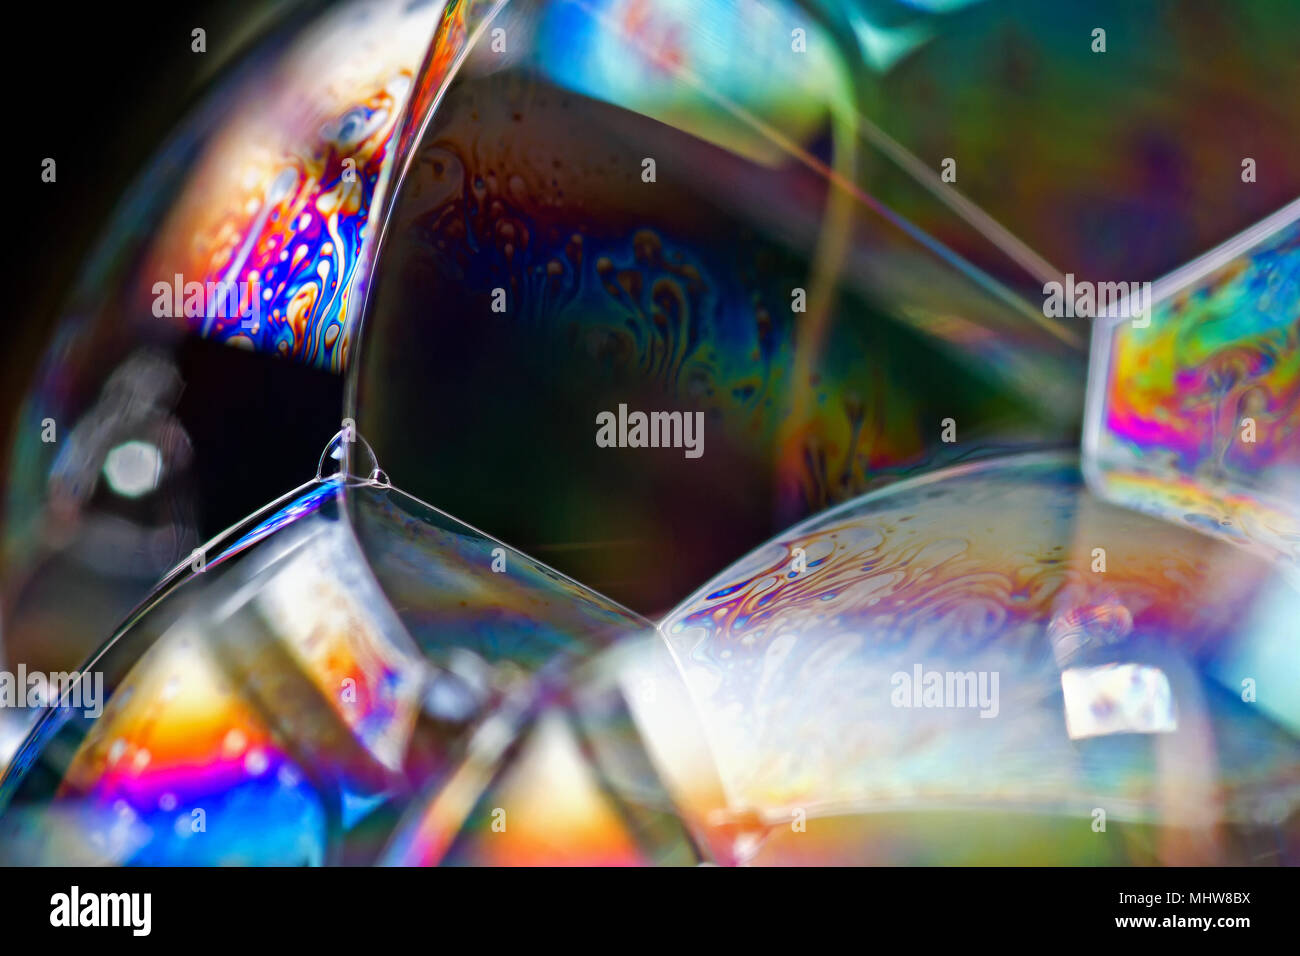 Soap bubbles show the interference of light reflecting off the surfaces of the thin soap film in rainbow patterns. Stock Photo